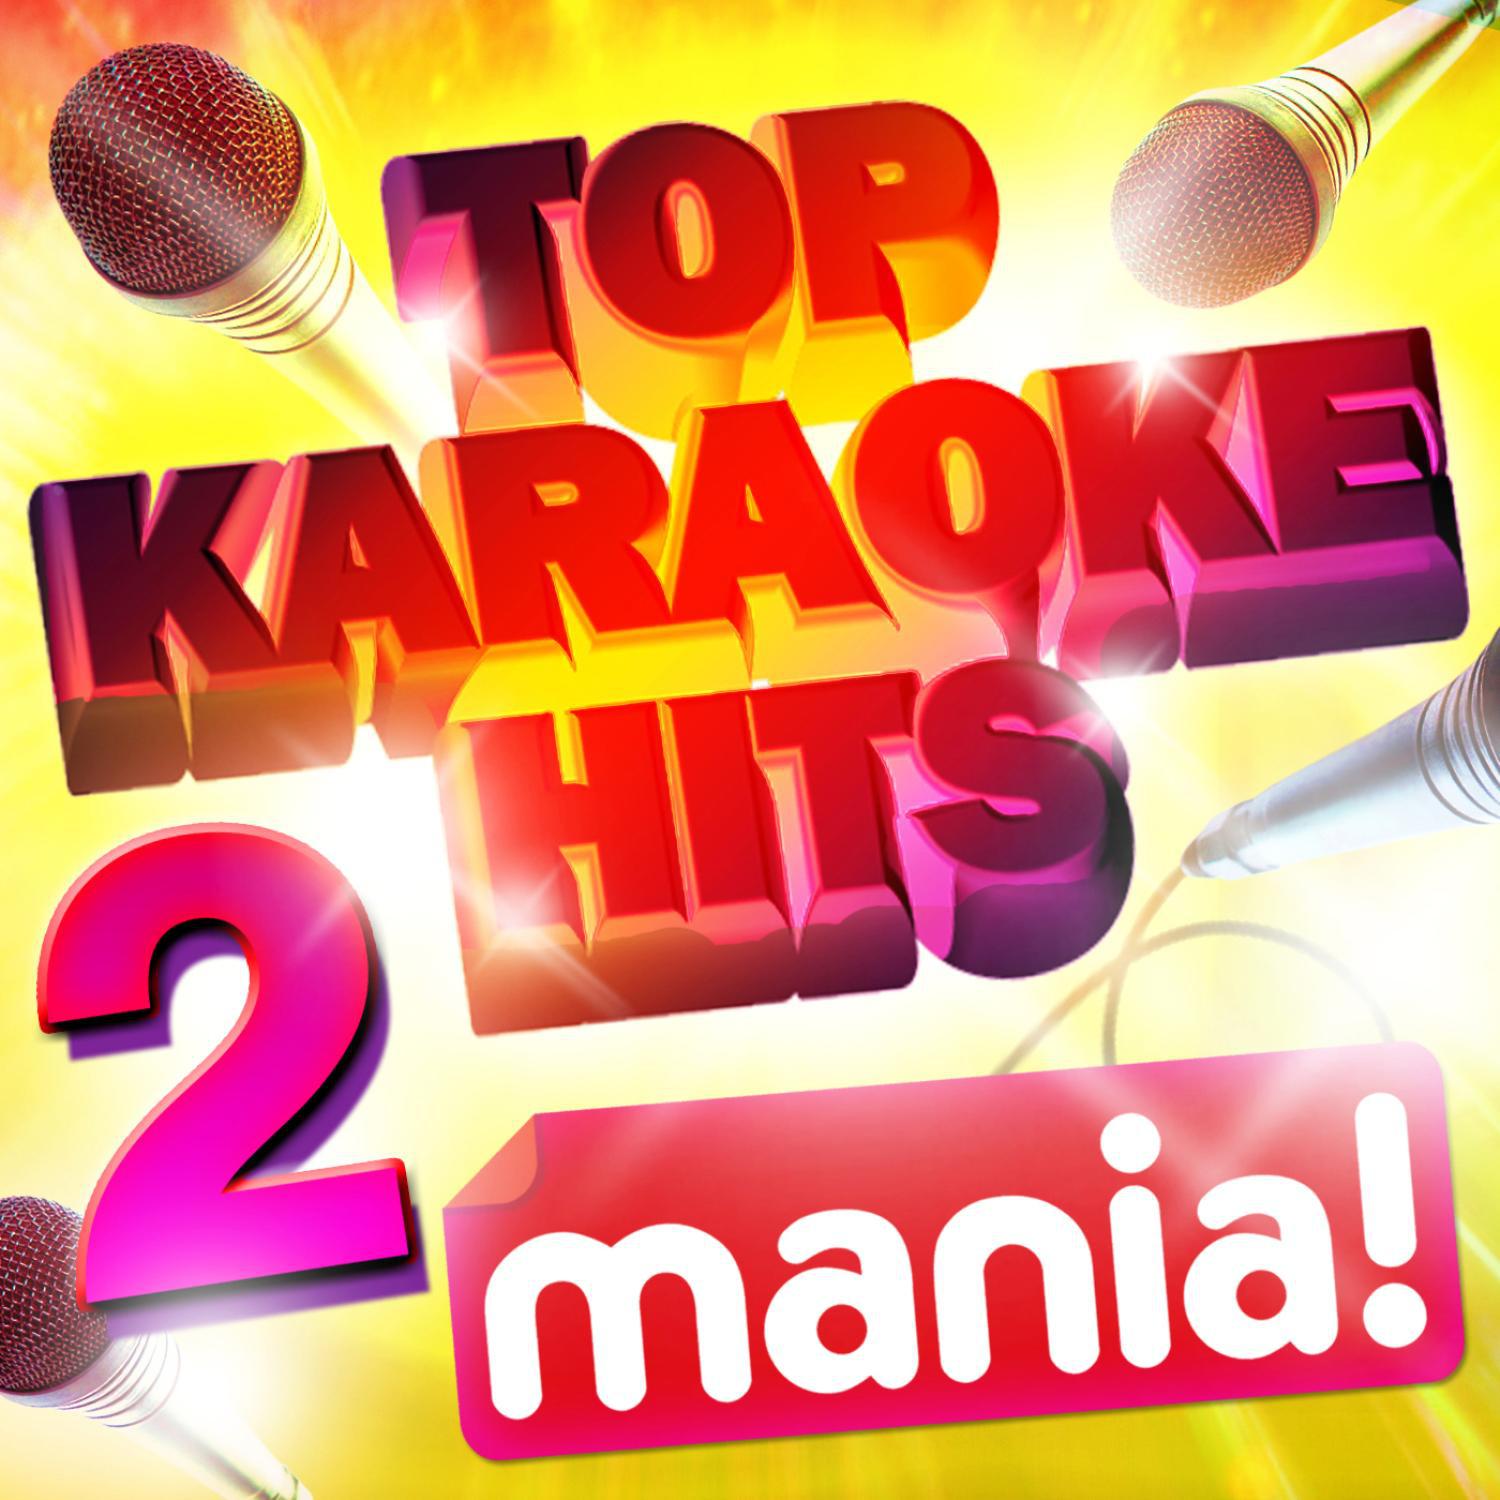 Karaoke Hits Mania! Vol 2 - 50 Vocal and Non vocal specially recorded Karaoke versions of the top hits!